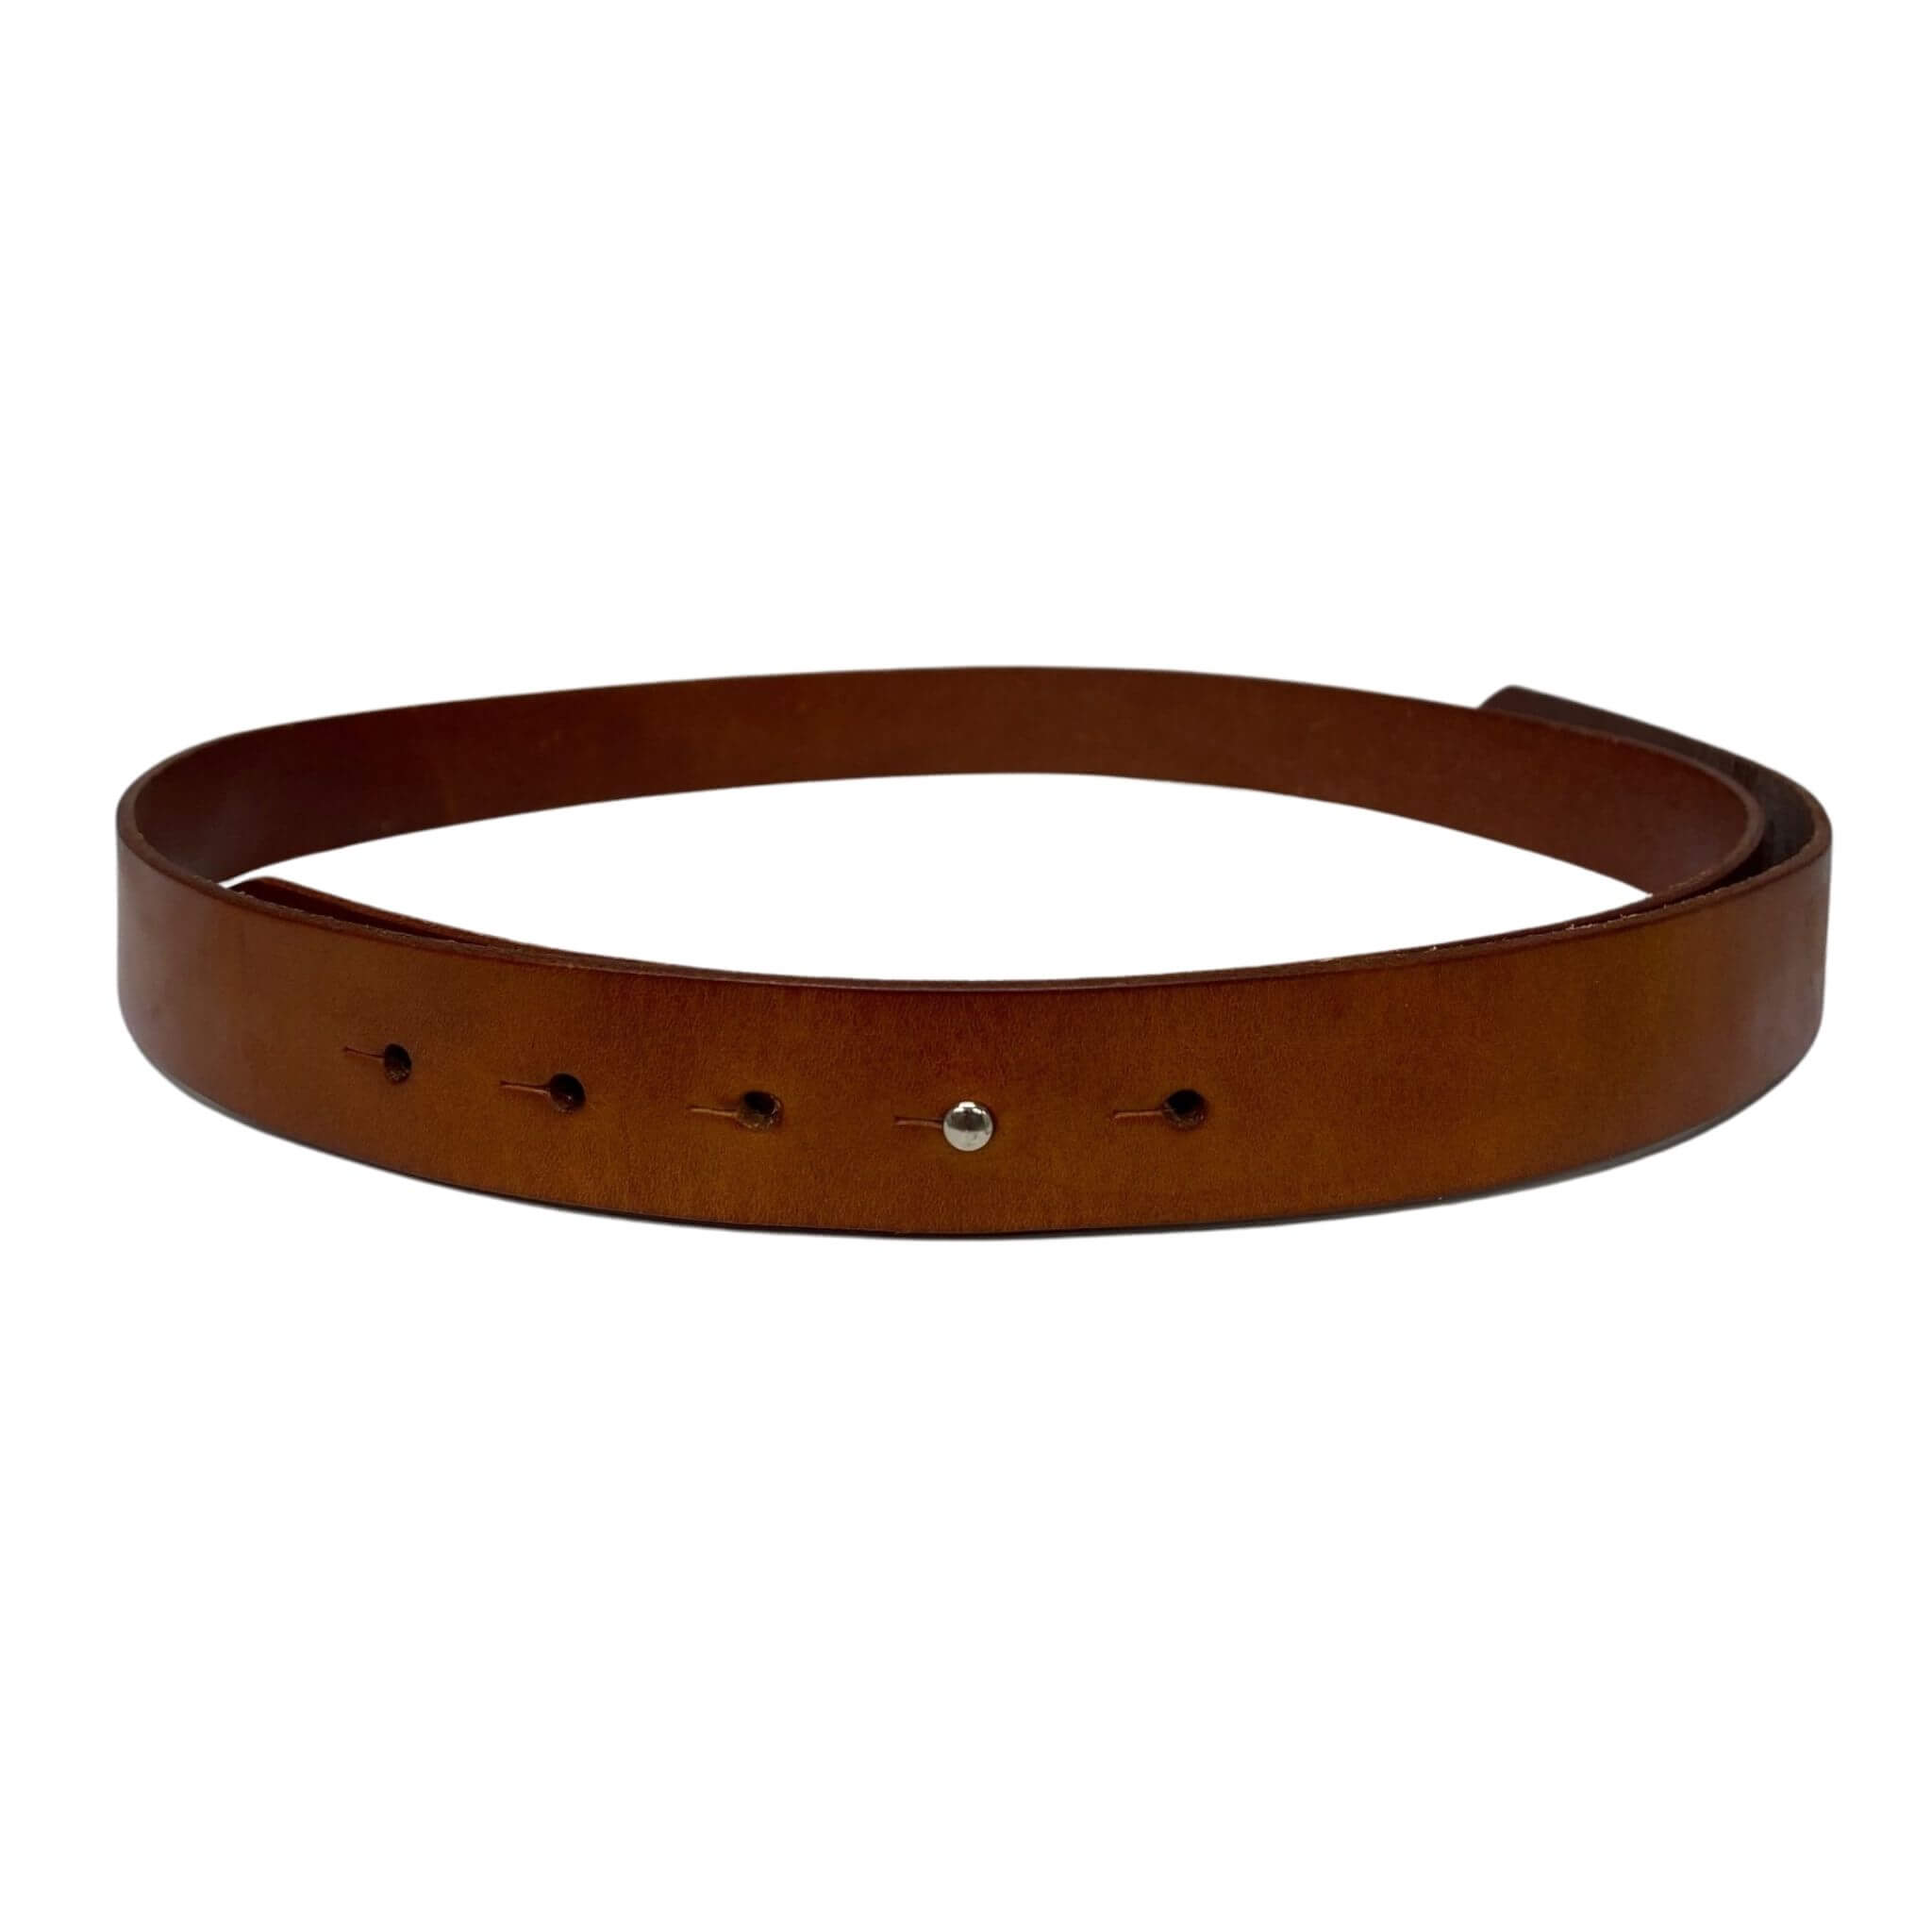 Ivy - Women's Tan Leather Belt with Stud Closure | Addison Road